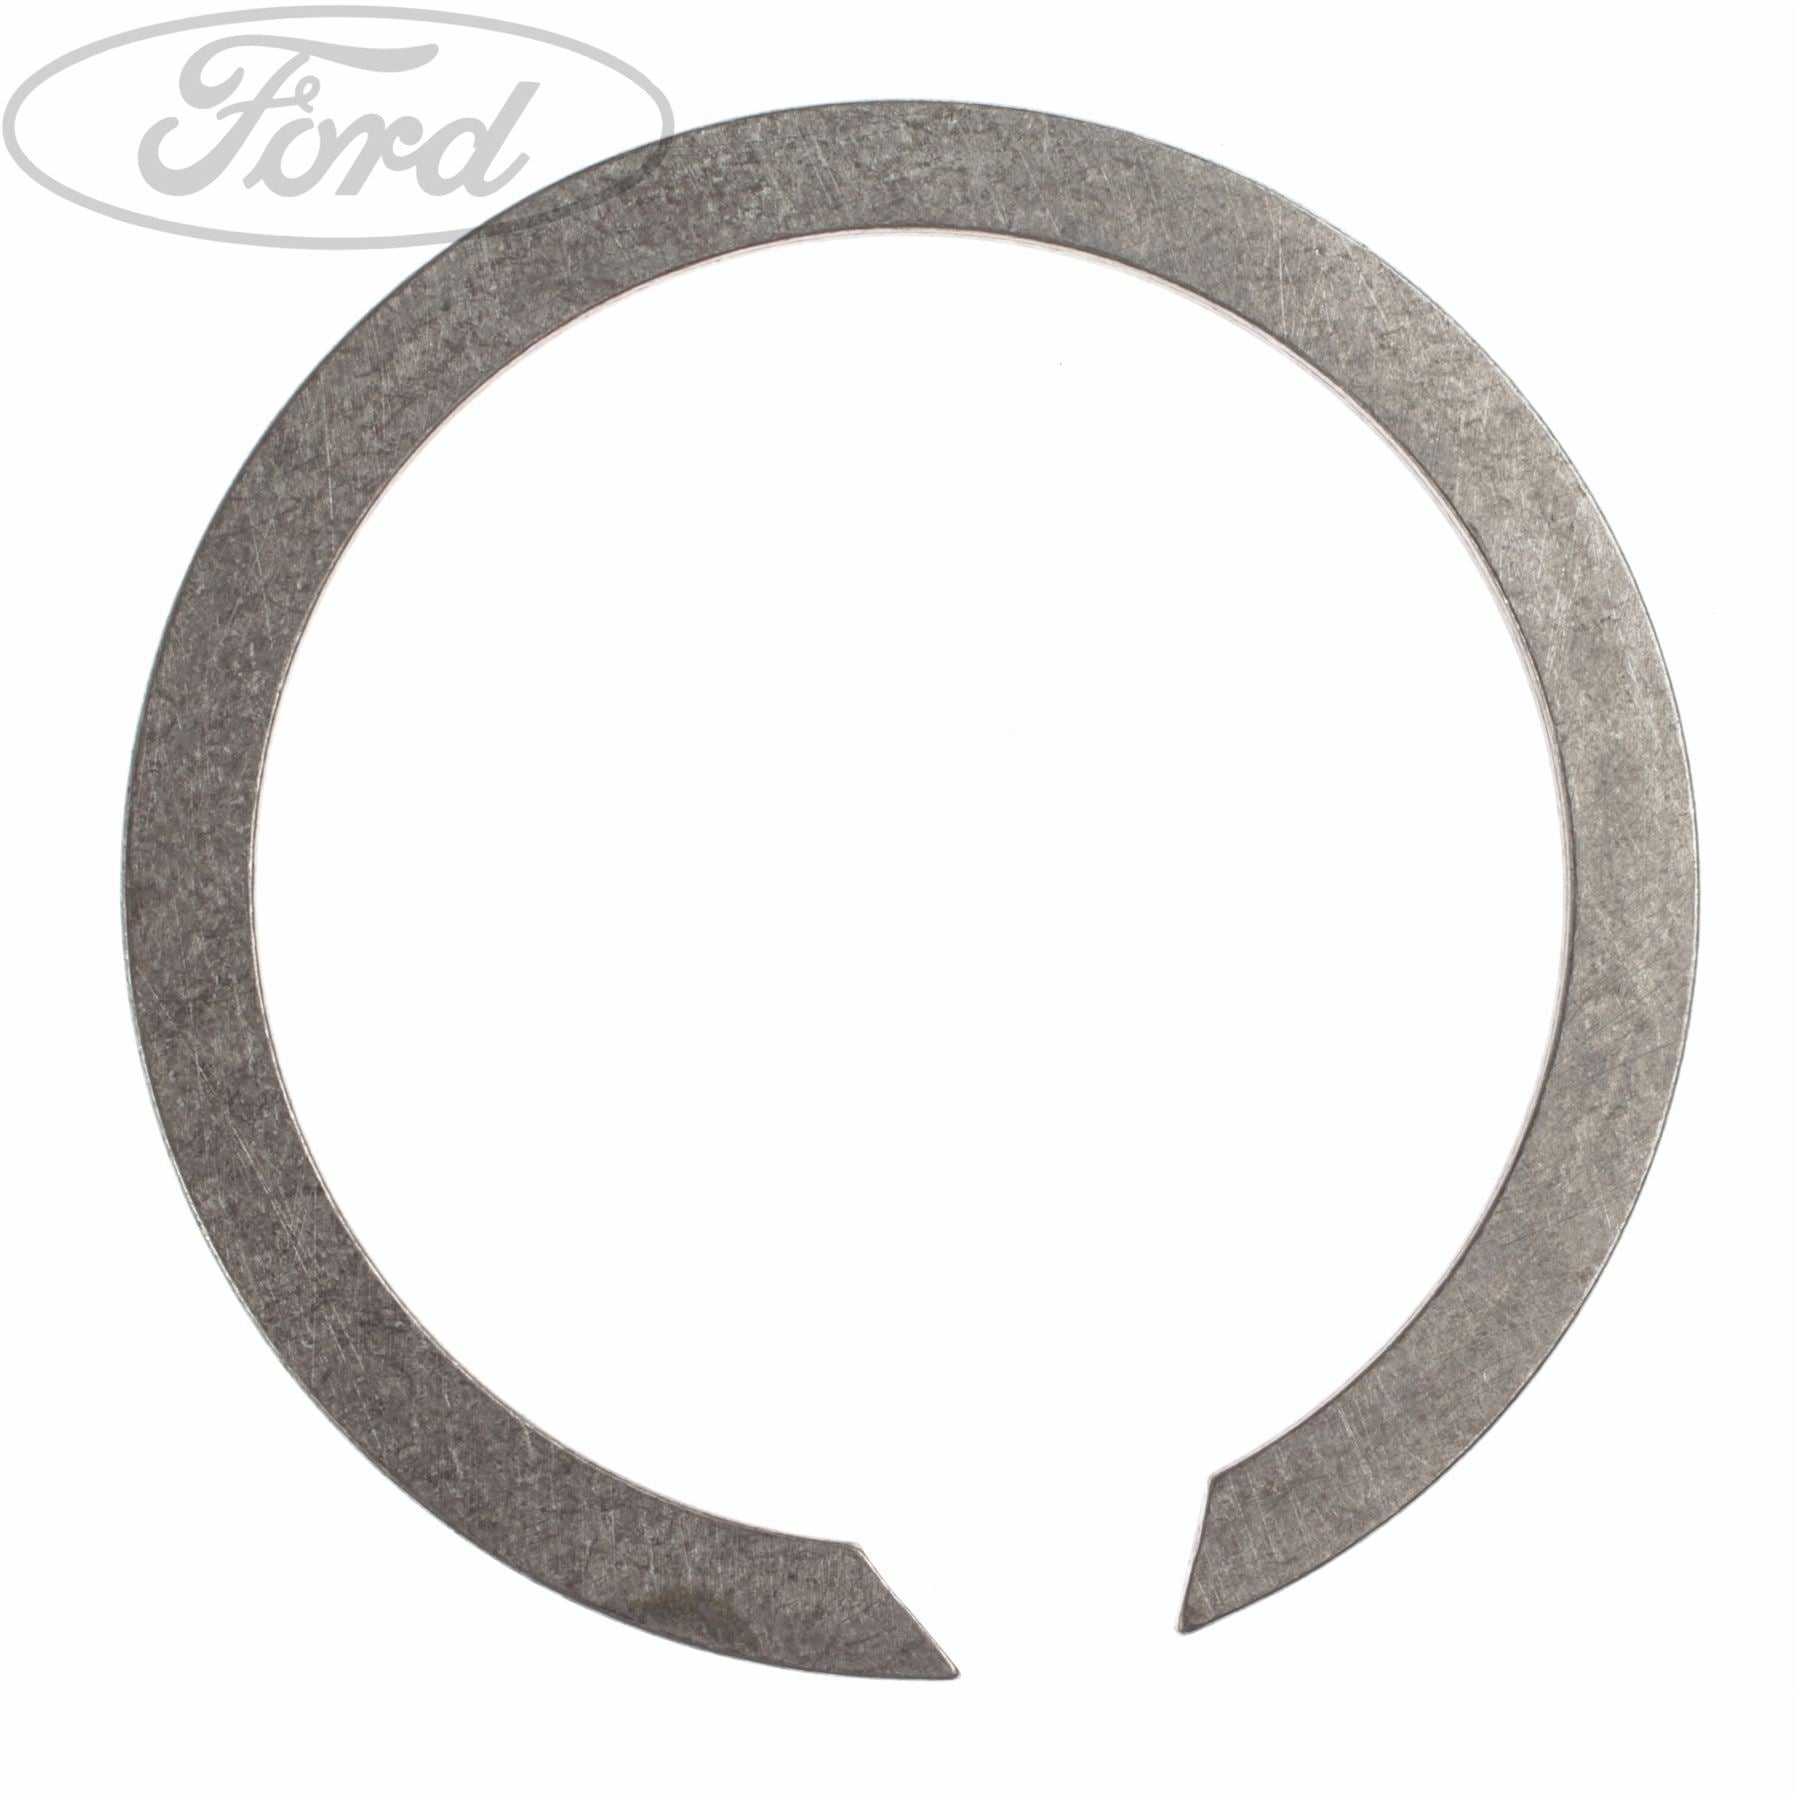 Ford, TRANSMISSION TRANSFER DRIVE COMPONENTS SNAP RING